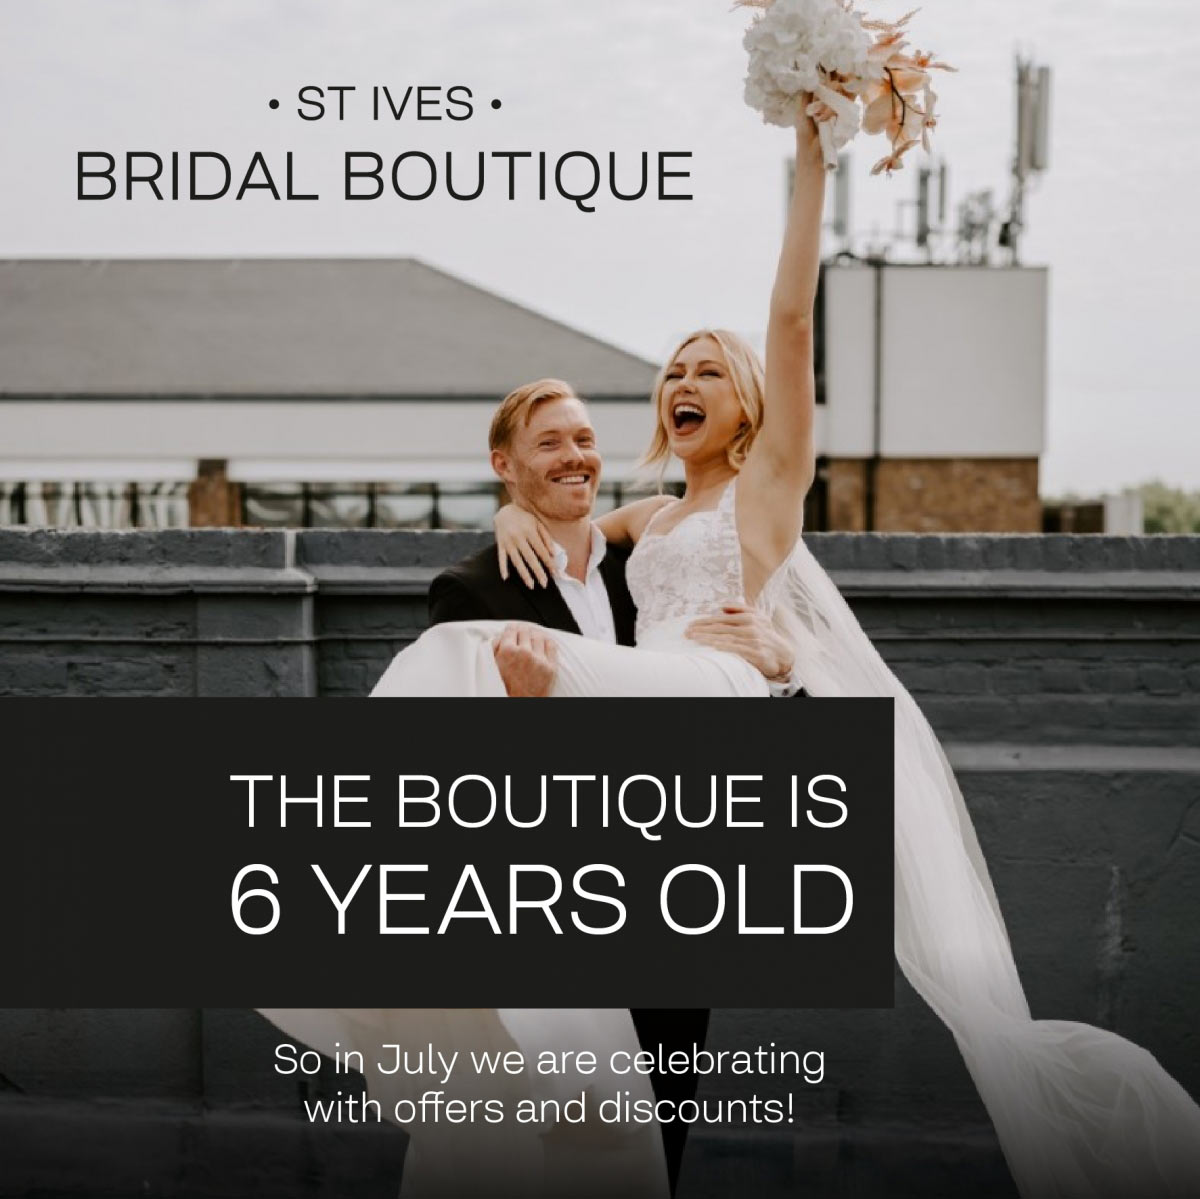 Birthday offers at St Ives Bridal Boutique!